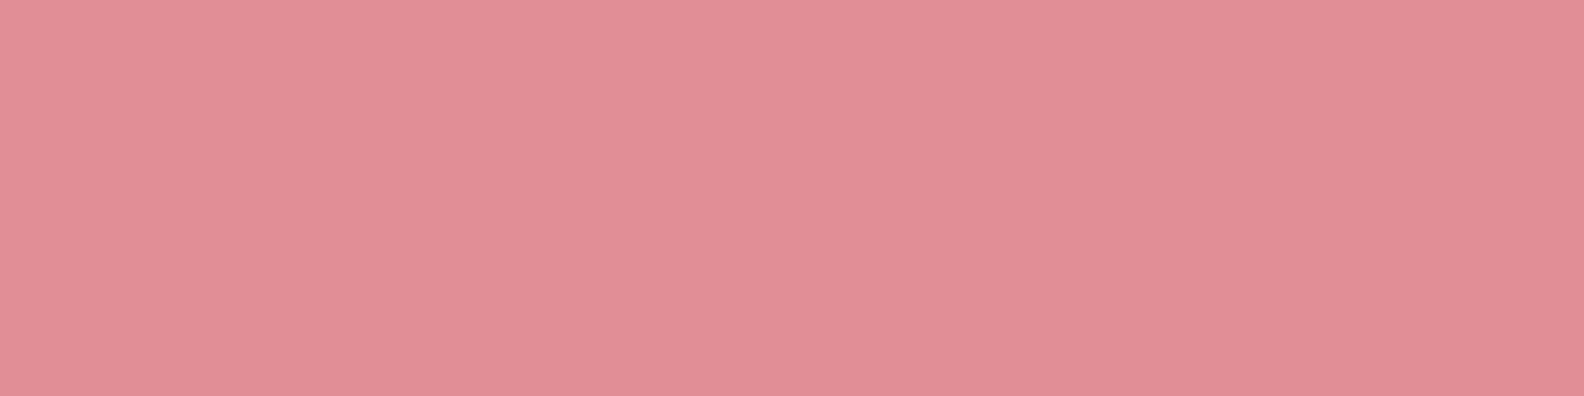 1584x396 Ruddy Pink Solid Color Background